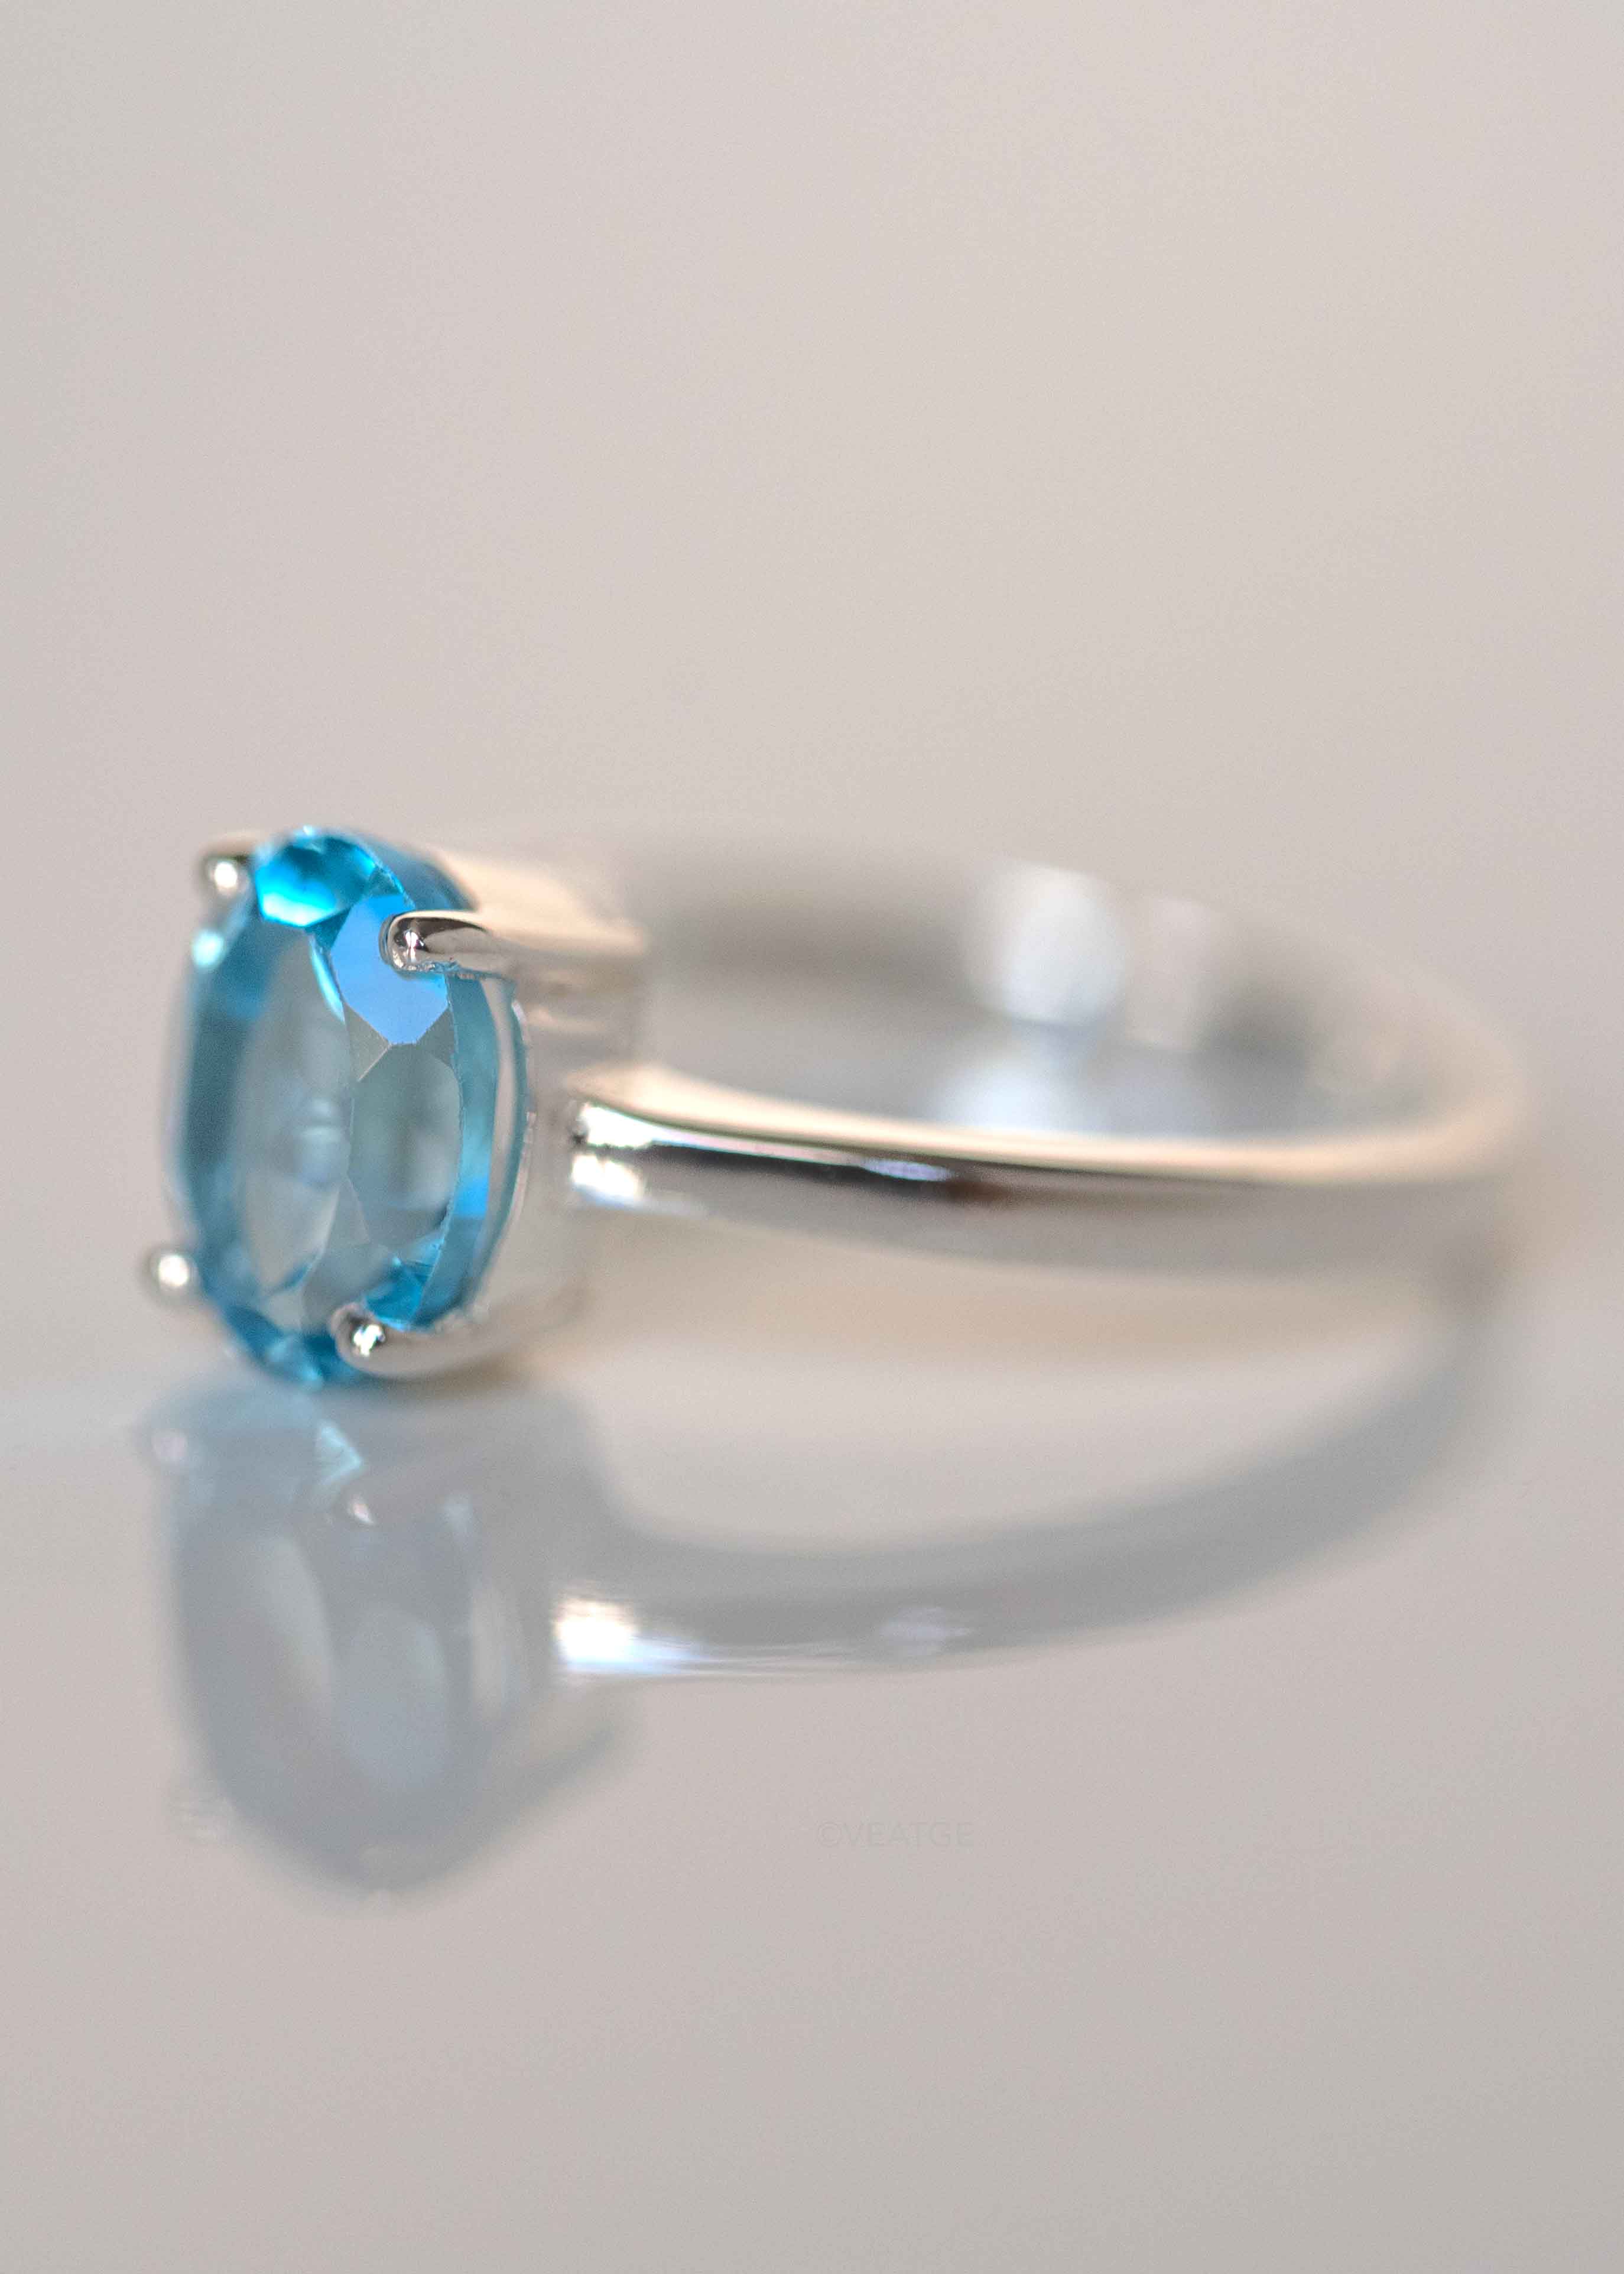 Swiss Blue Topaz Ring in 925 Sterling Silver, Engagement, Promise Gifts for Her